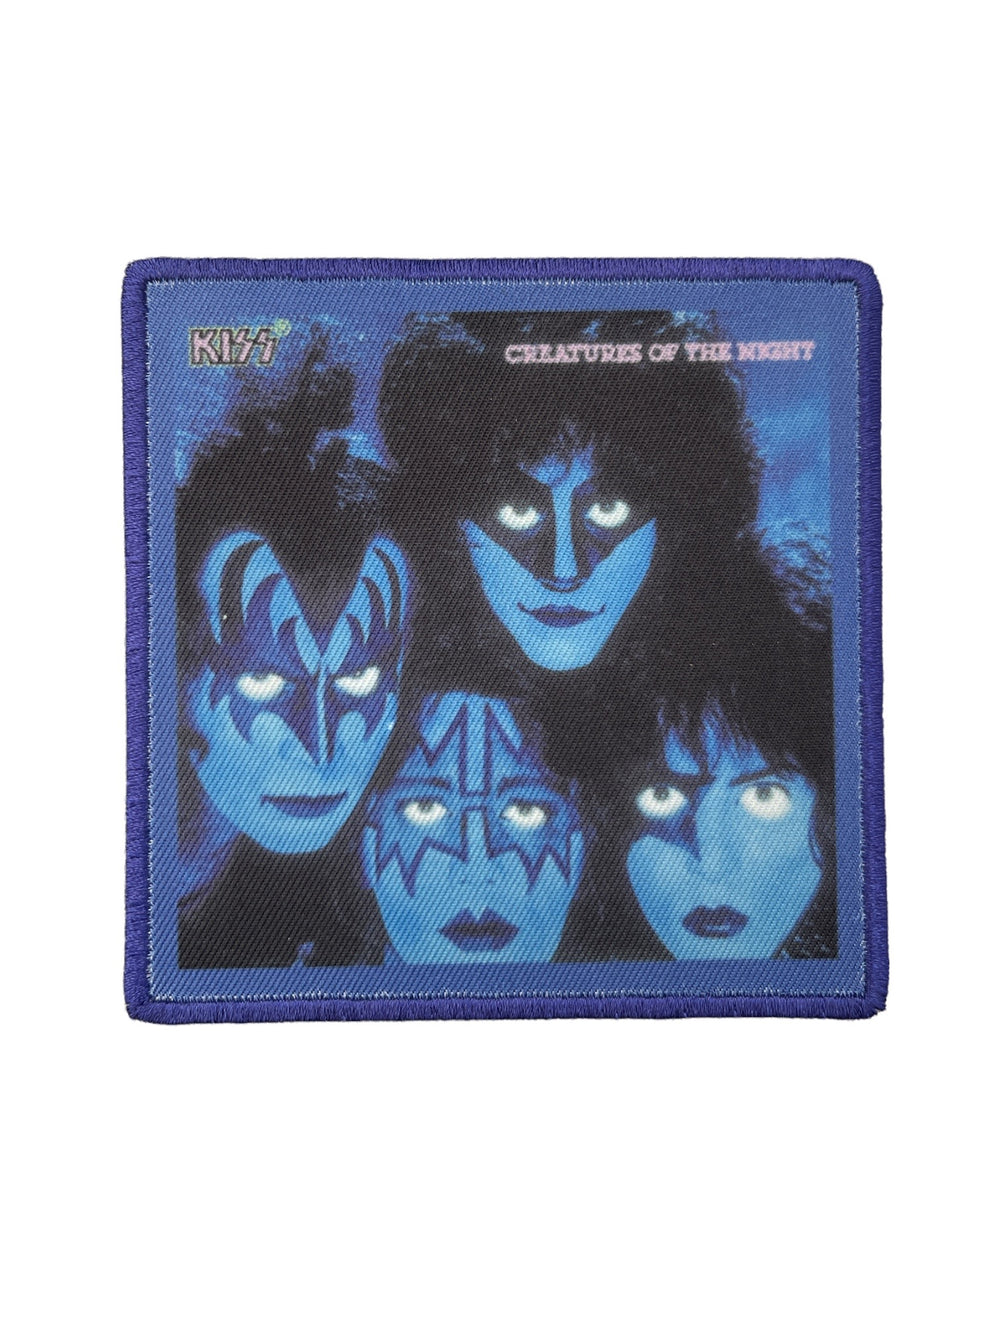 KISS Standard Patch: Creatures Of The Night (Album Cover) Official Woven Patch Brand New